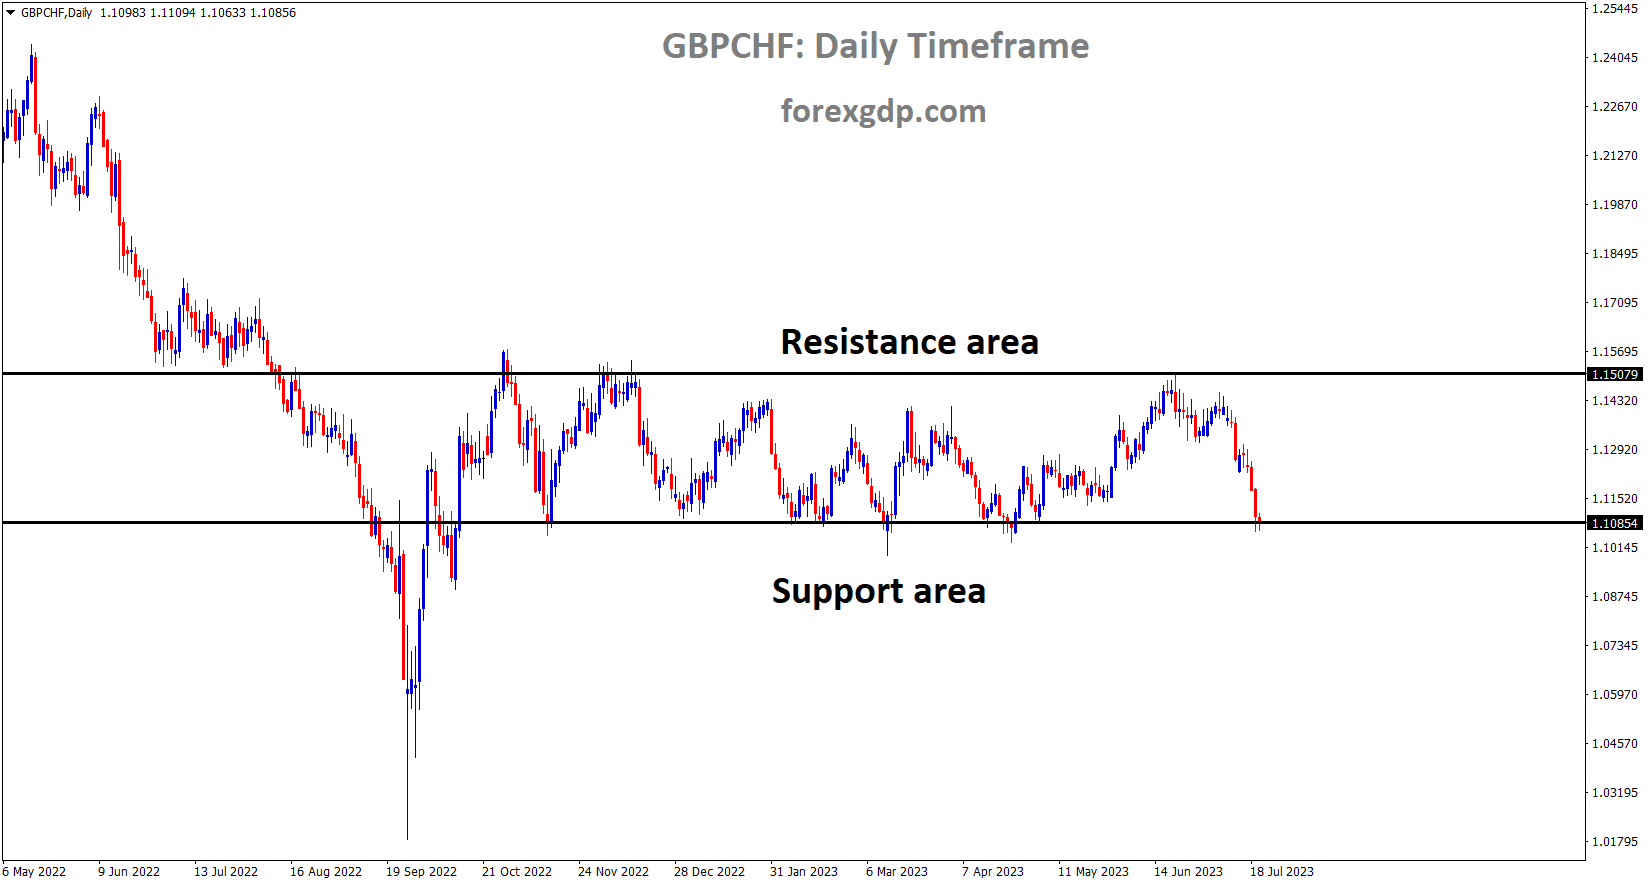 GBPCHF is moving in the Box pattern and the market has reached the horizontal support area of the pattern 1